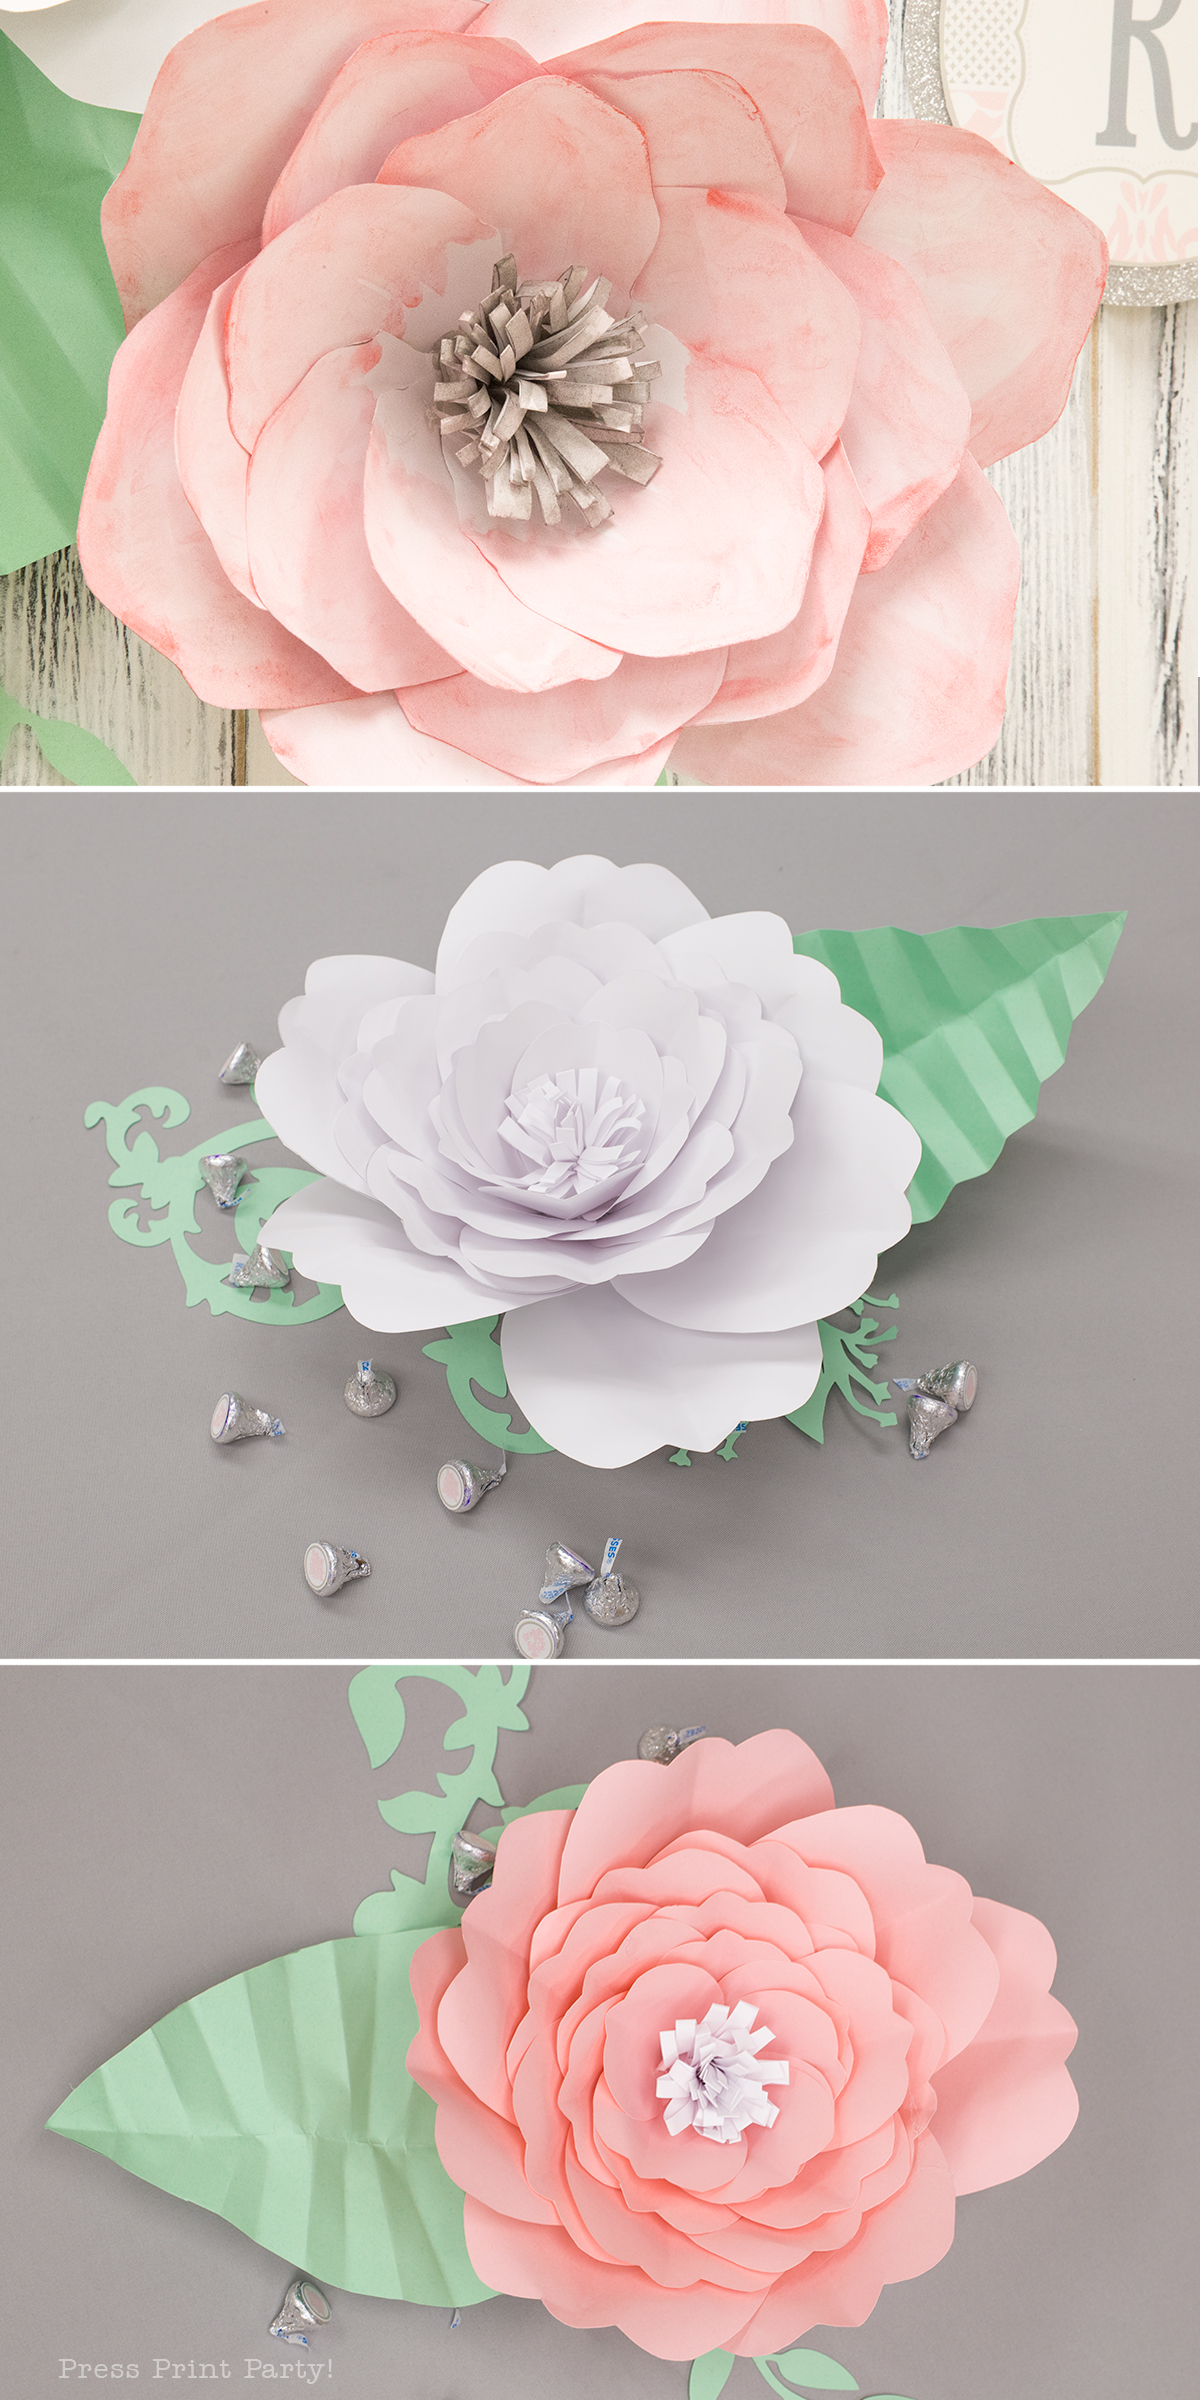 A three-picture graphic showing three different paper flowers you can make for any special occasion. The top and bottom pictures feature two pink paper roses, and the center picture shows a white paper flower with paper leaves. 